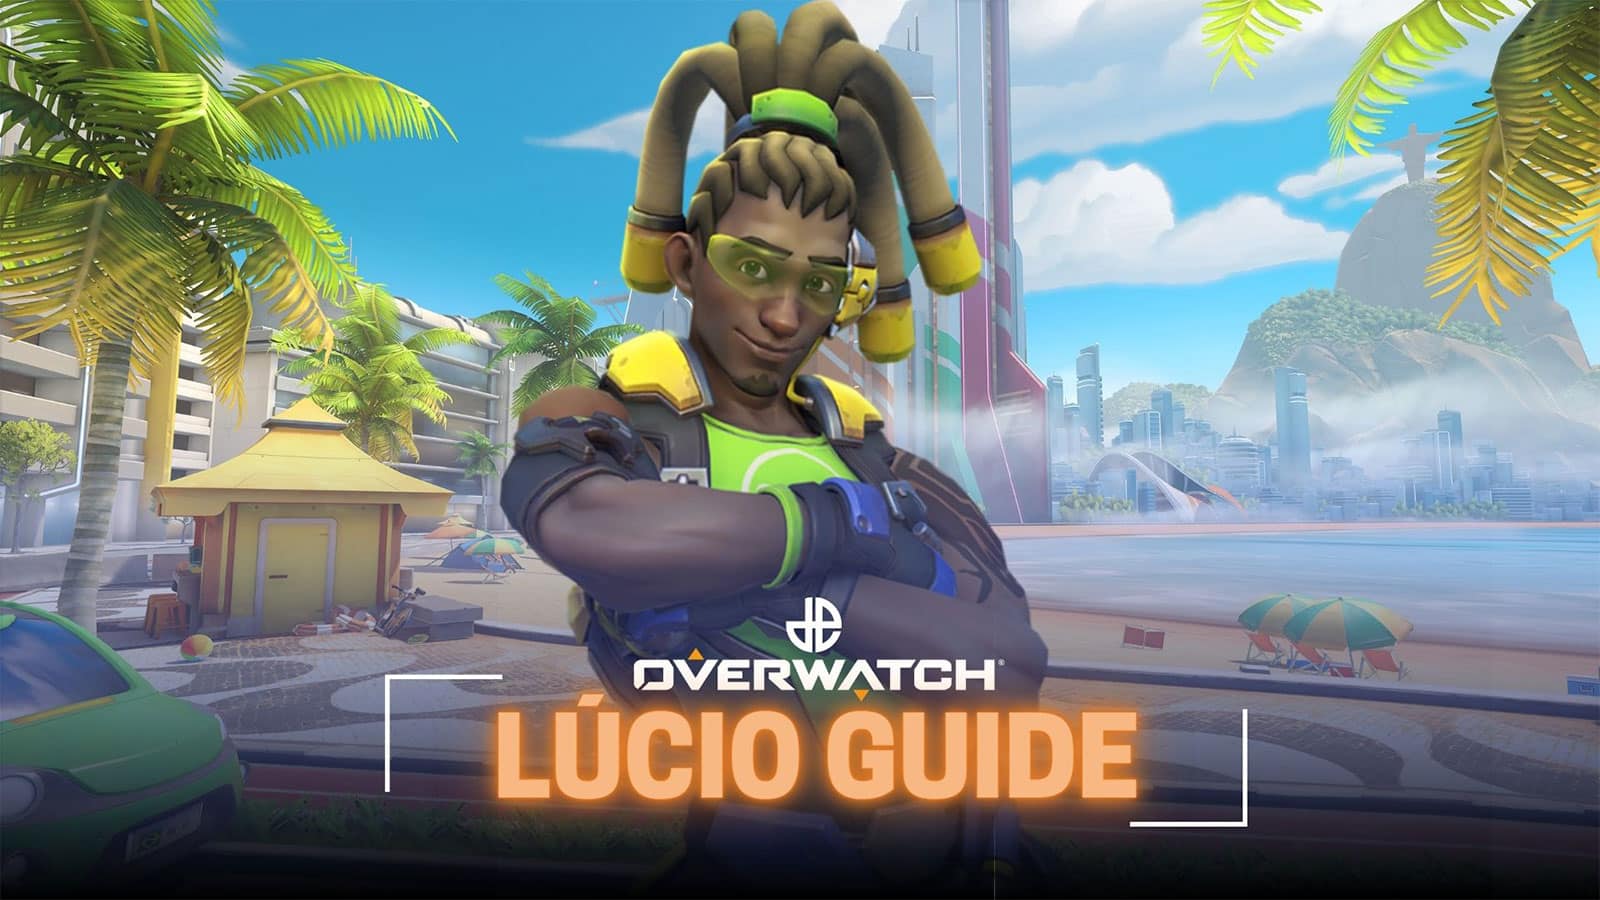 Overwatch Lucio ultimate guide